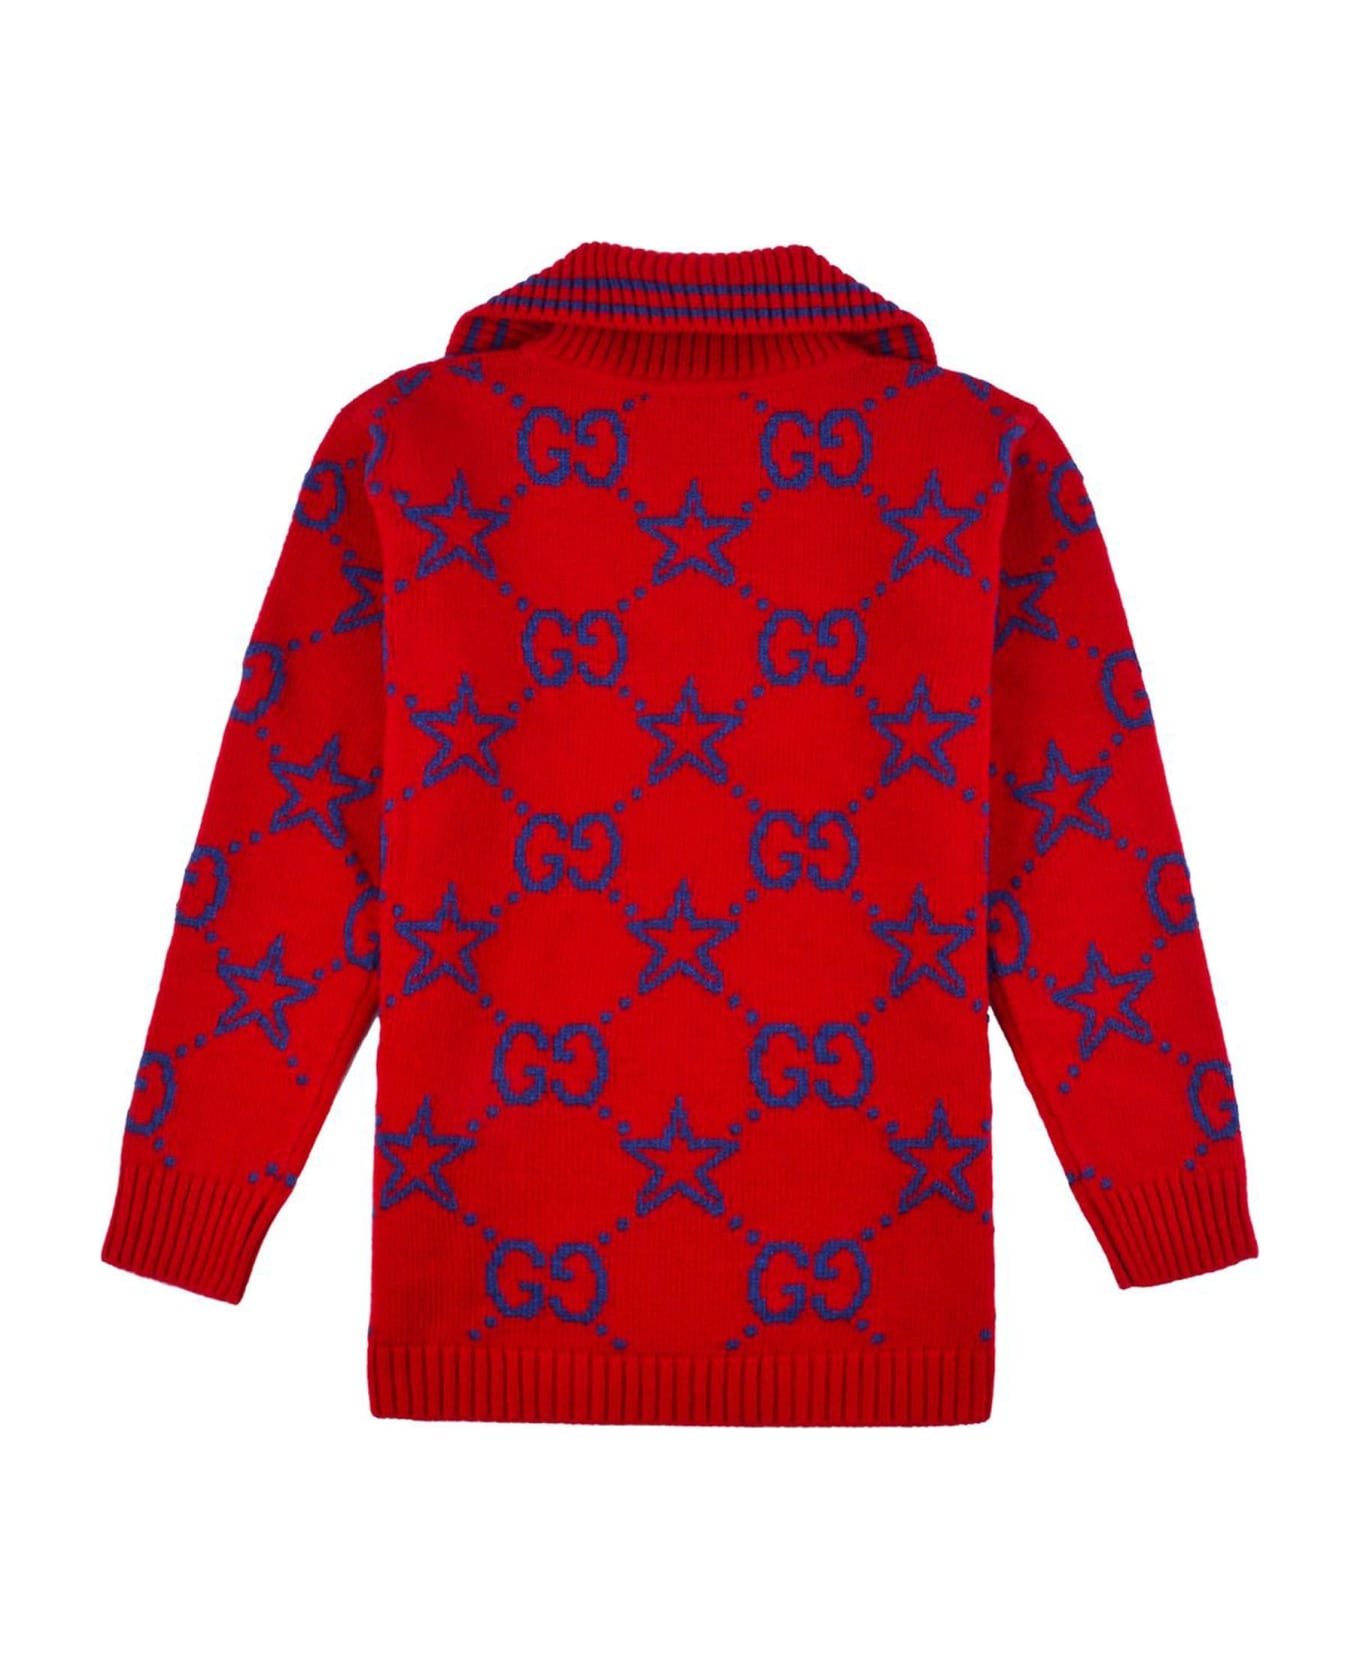 Gucci Red Wool Sweater - Rosso